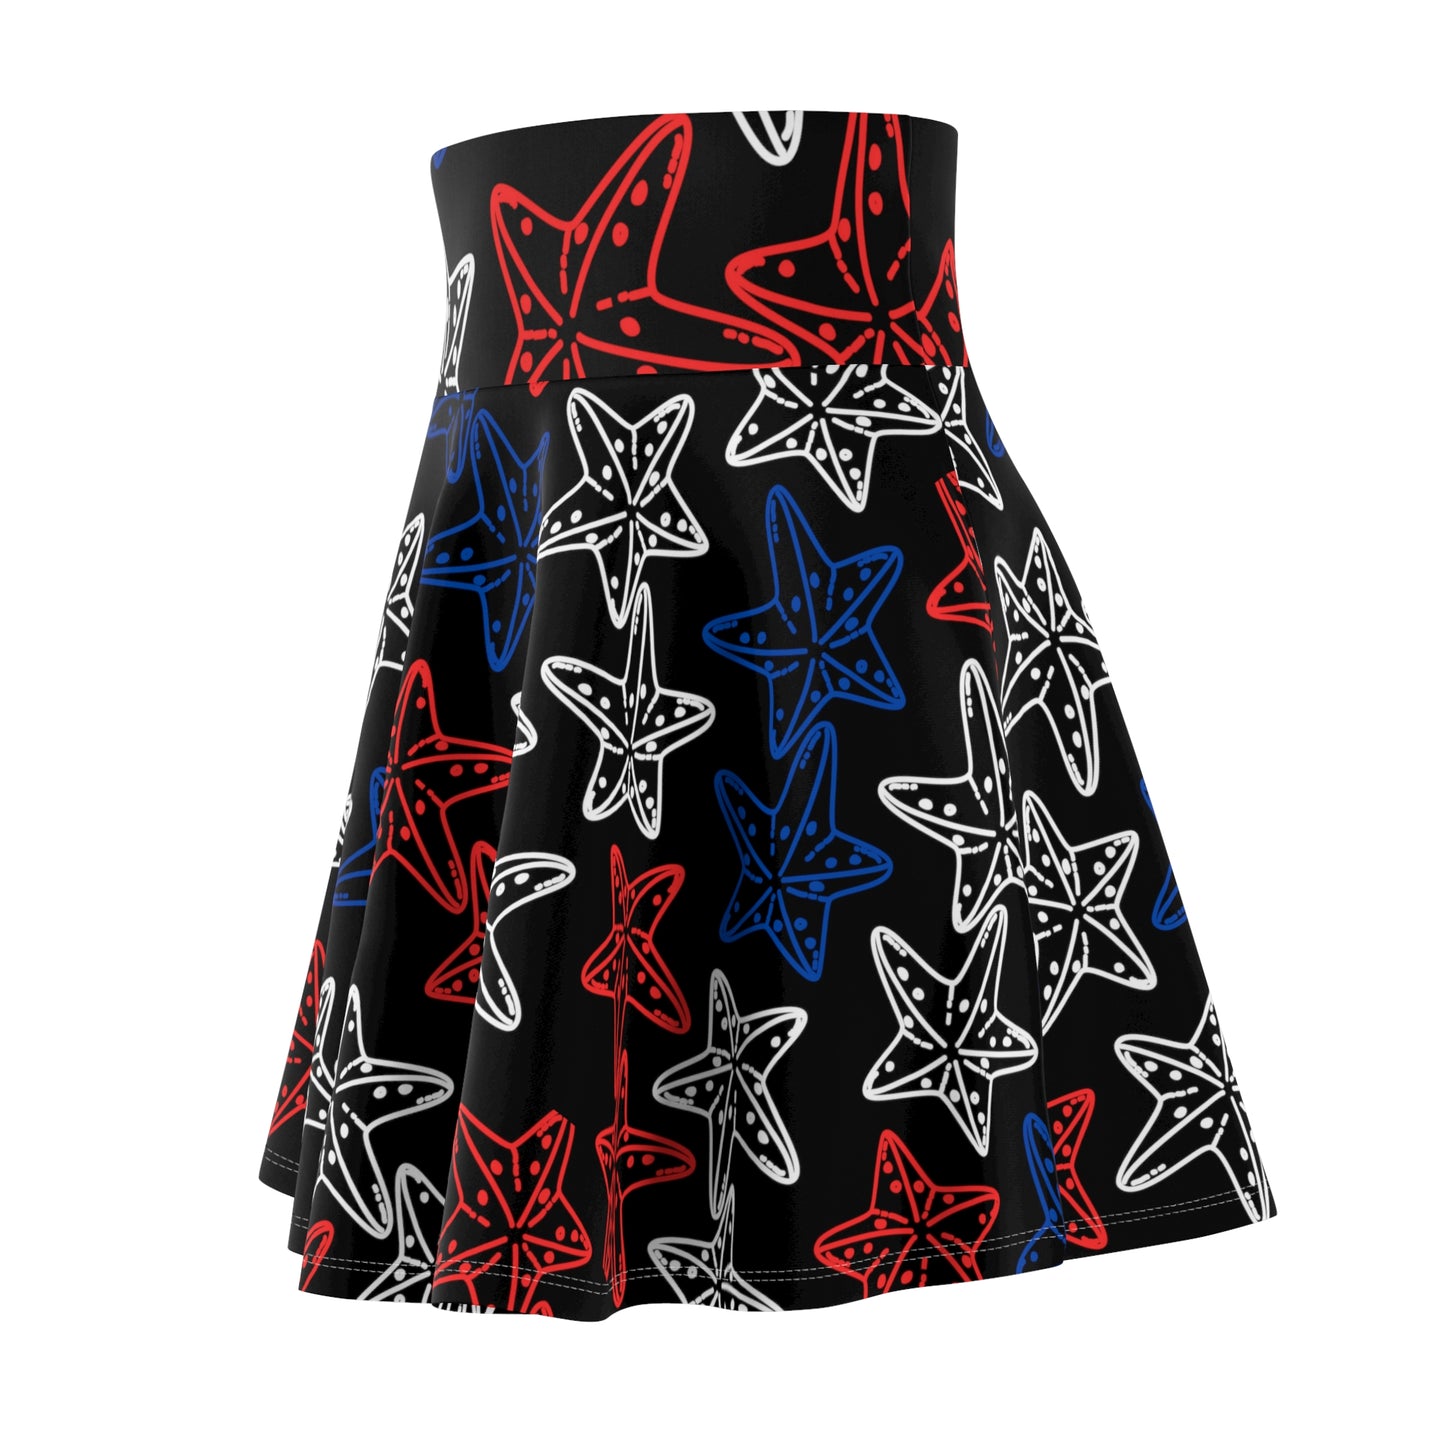 4th of July - Red White and Blue Starfish - Skirt